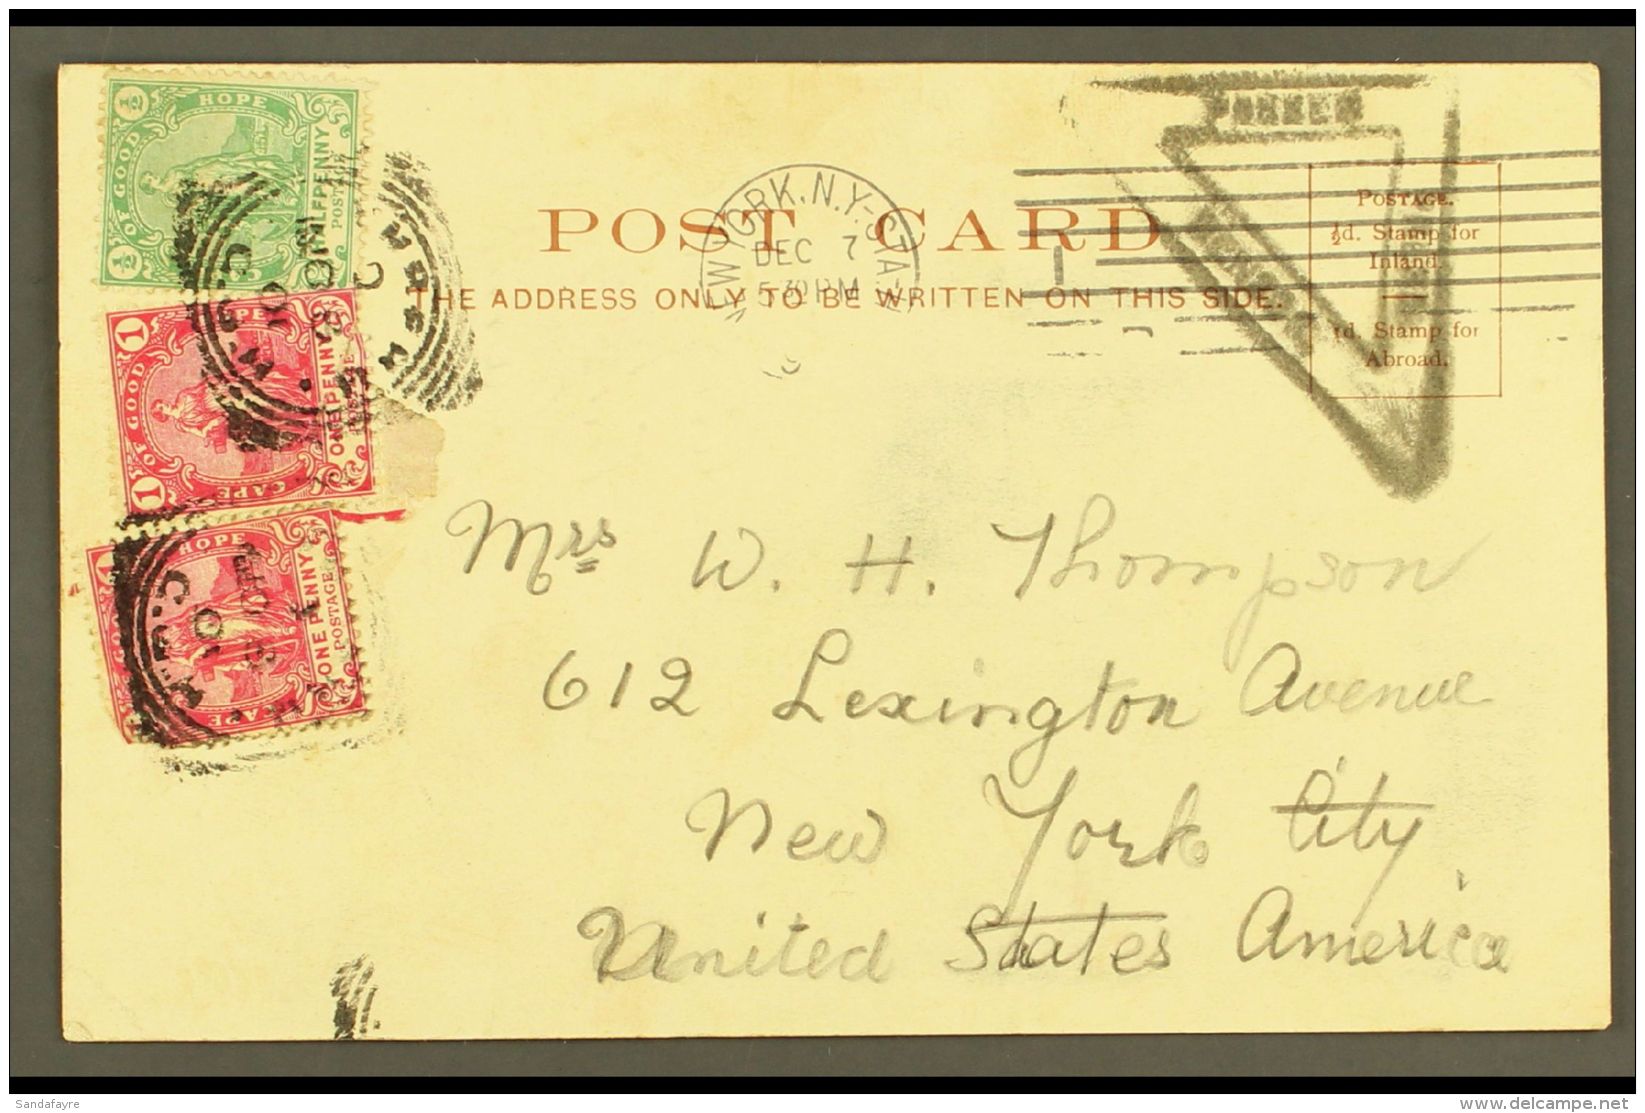 CAPE OF GOOD HOPE 1901 Postcard (picture Of Parliament Hose, Cape Town) To USA, Cape Squared Circle 8.11.01 Pmk,... - Unclassified